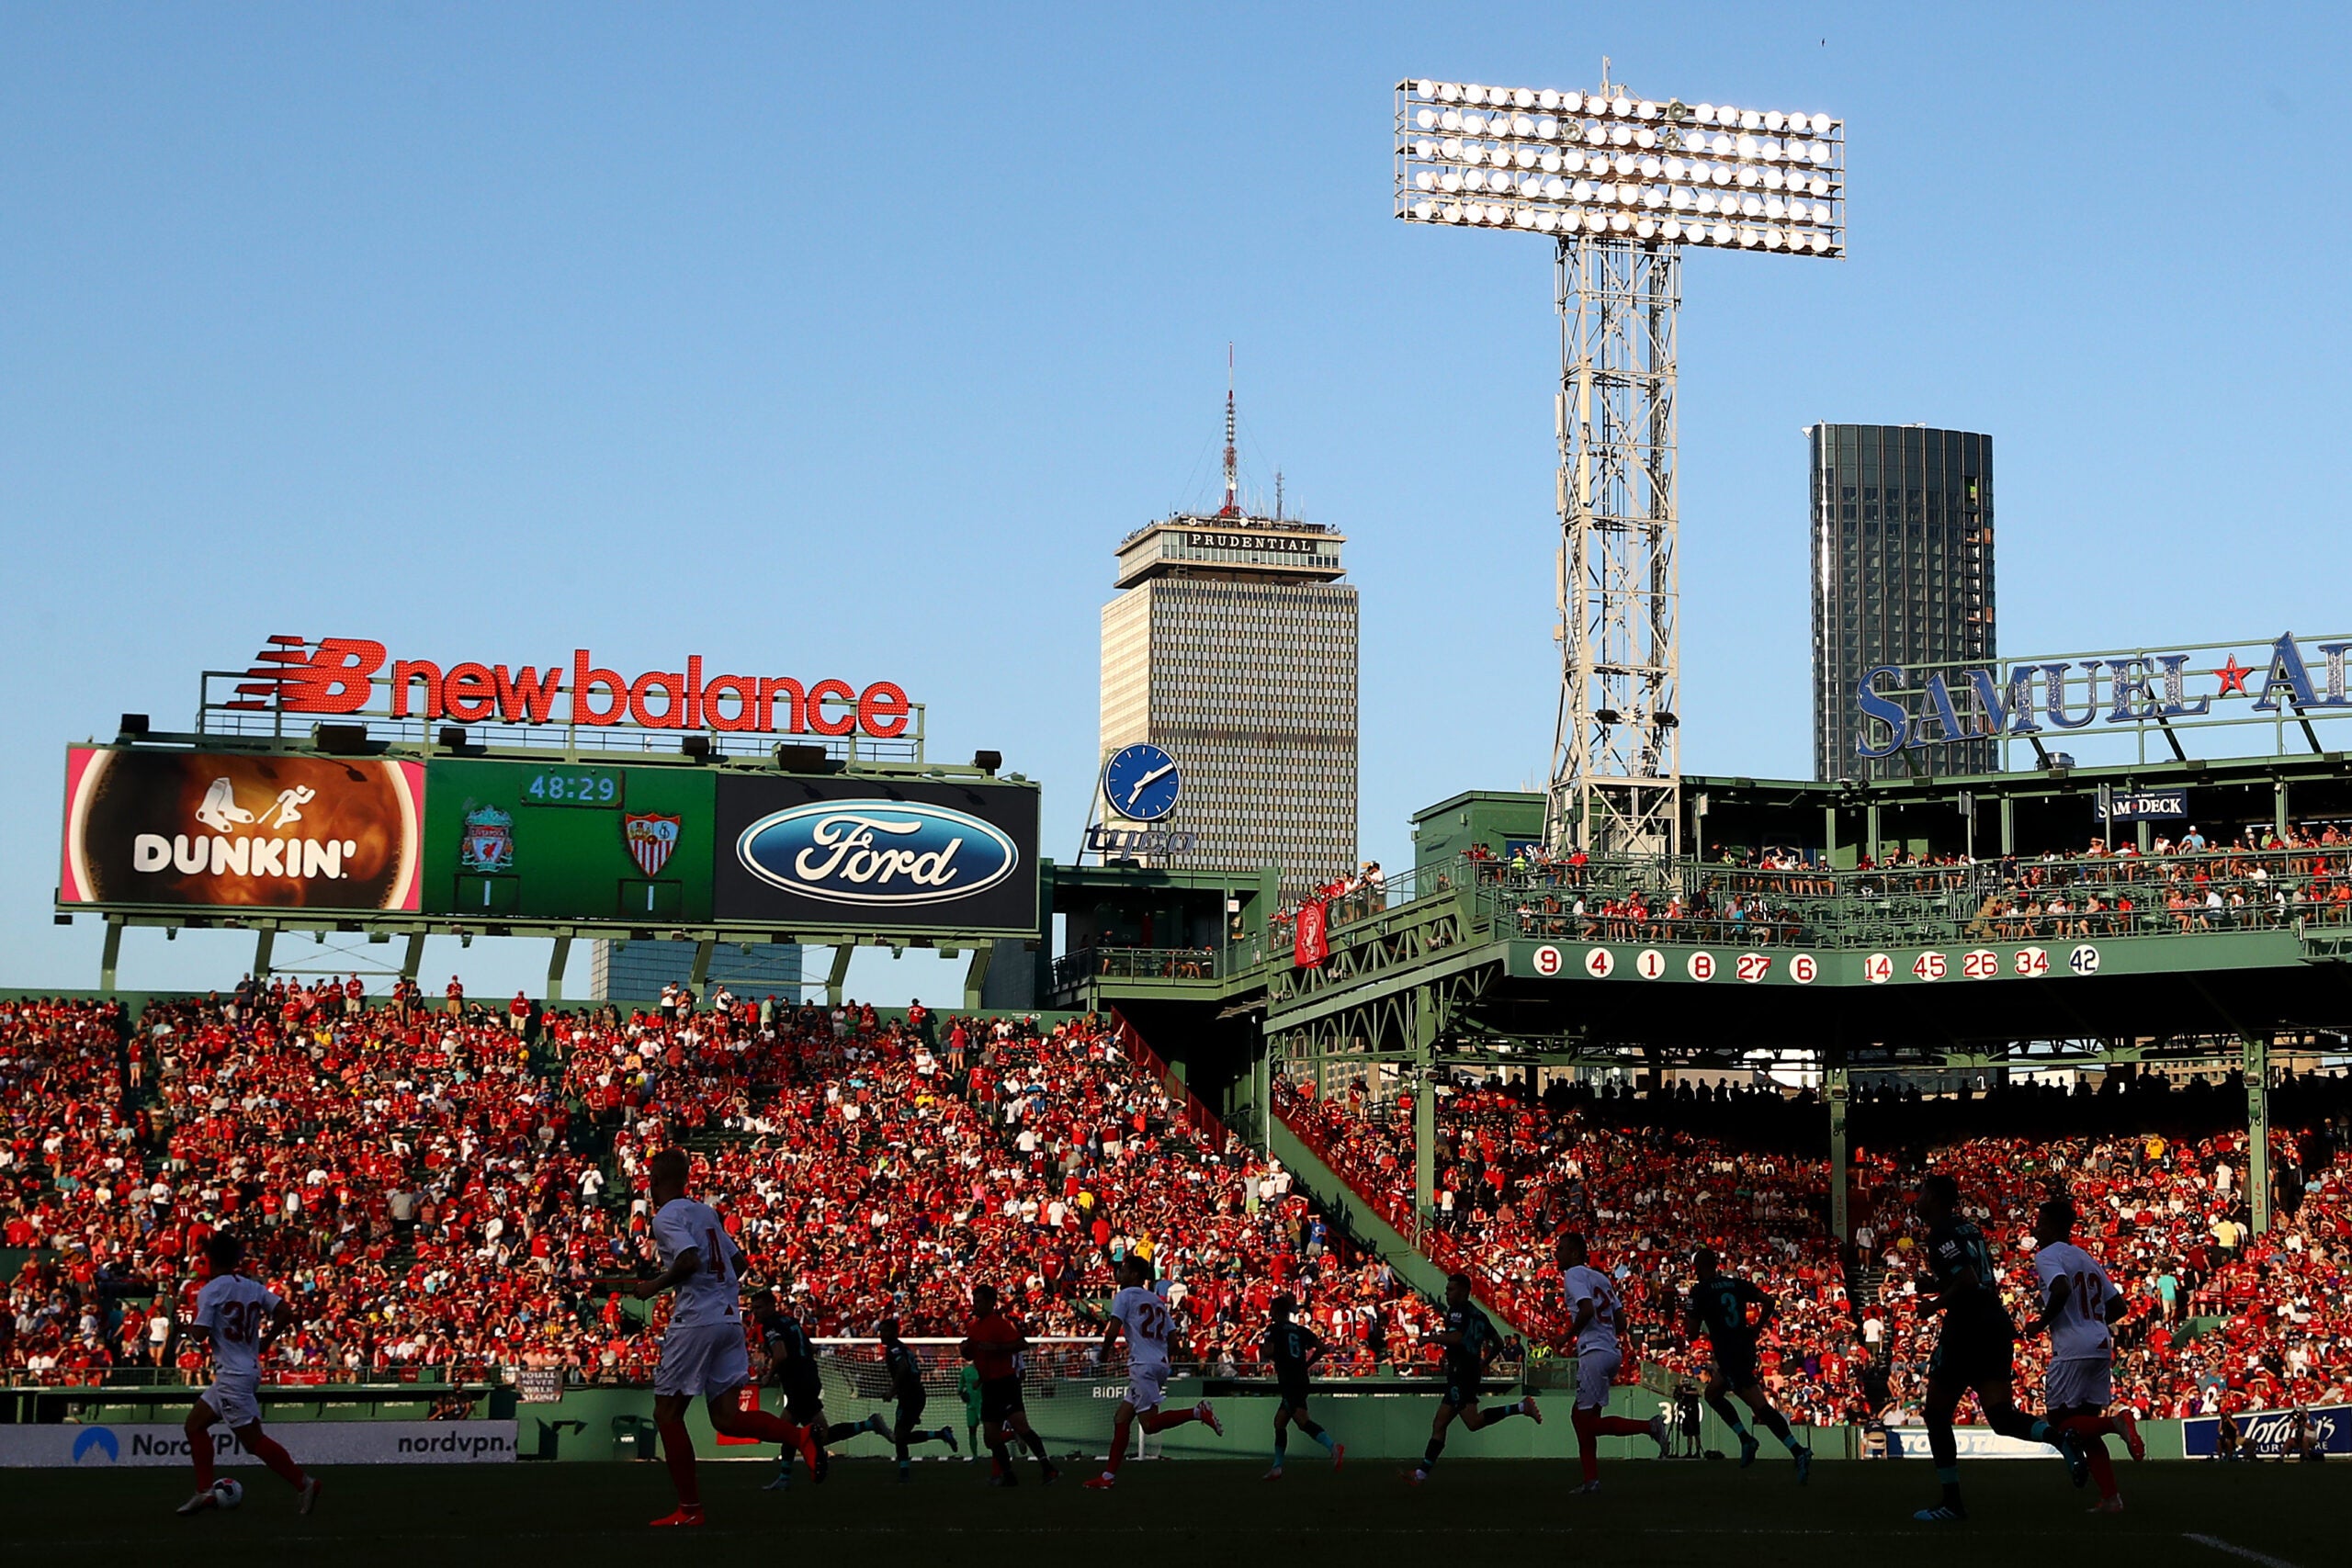 Liverpool Football Club will play soccer at Fenway Park in July game